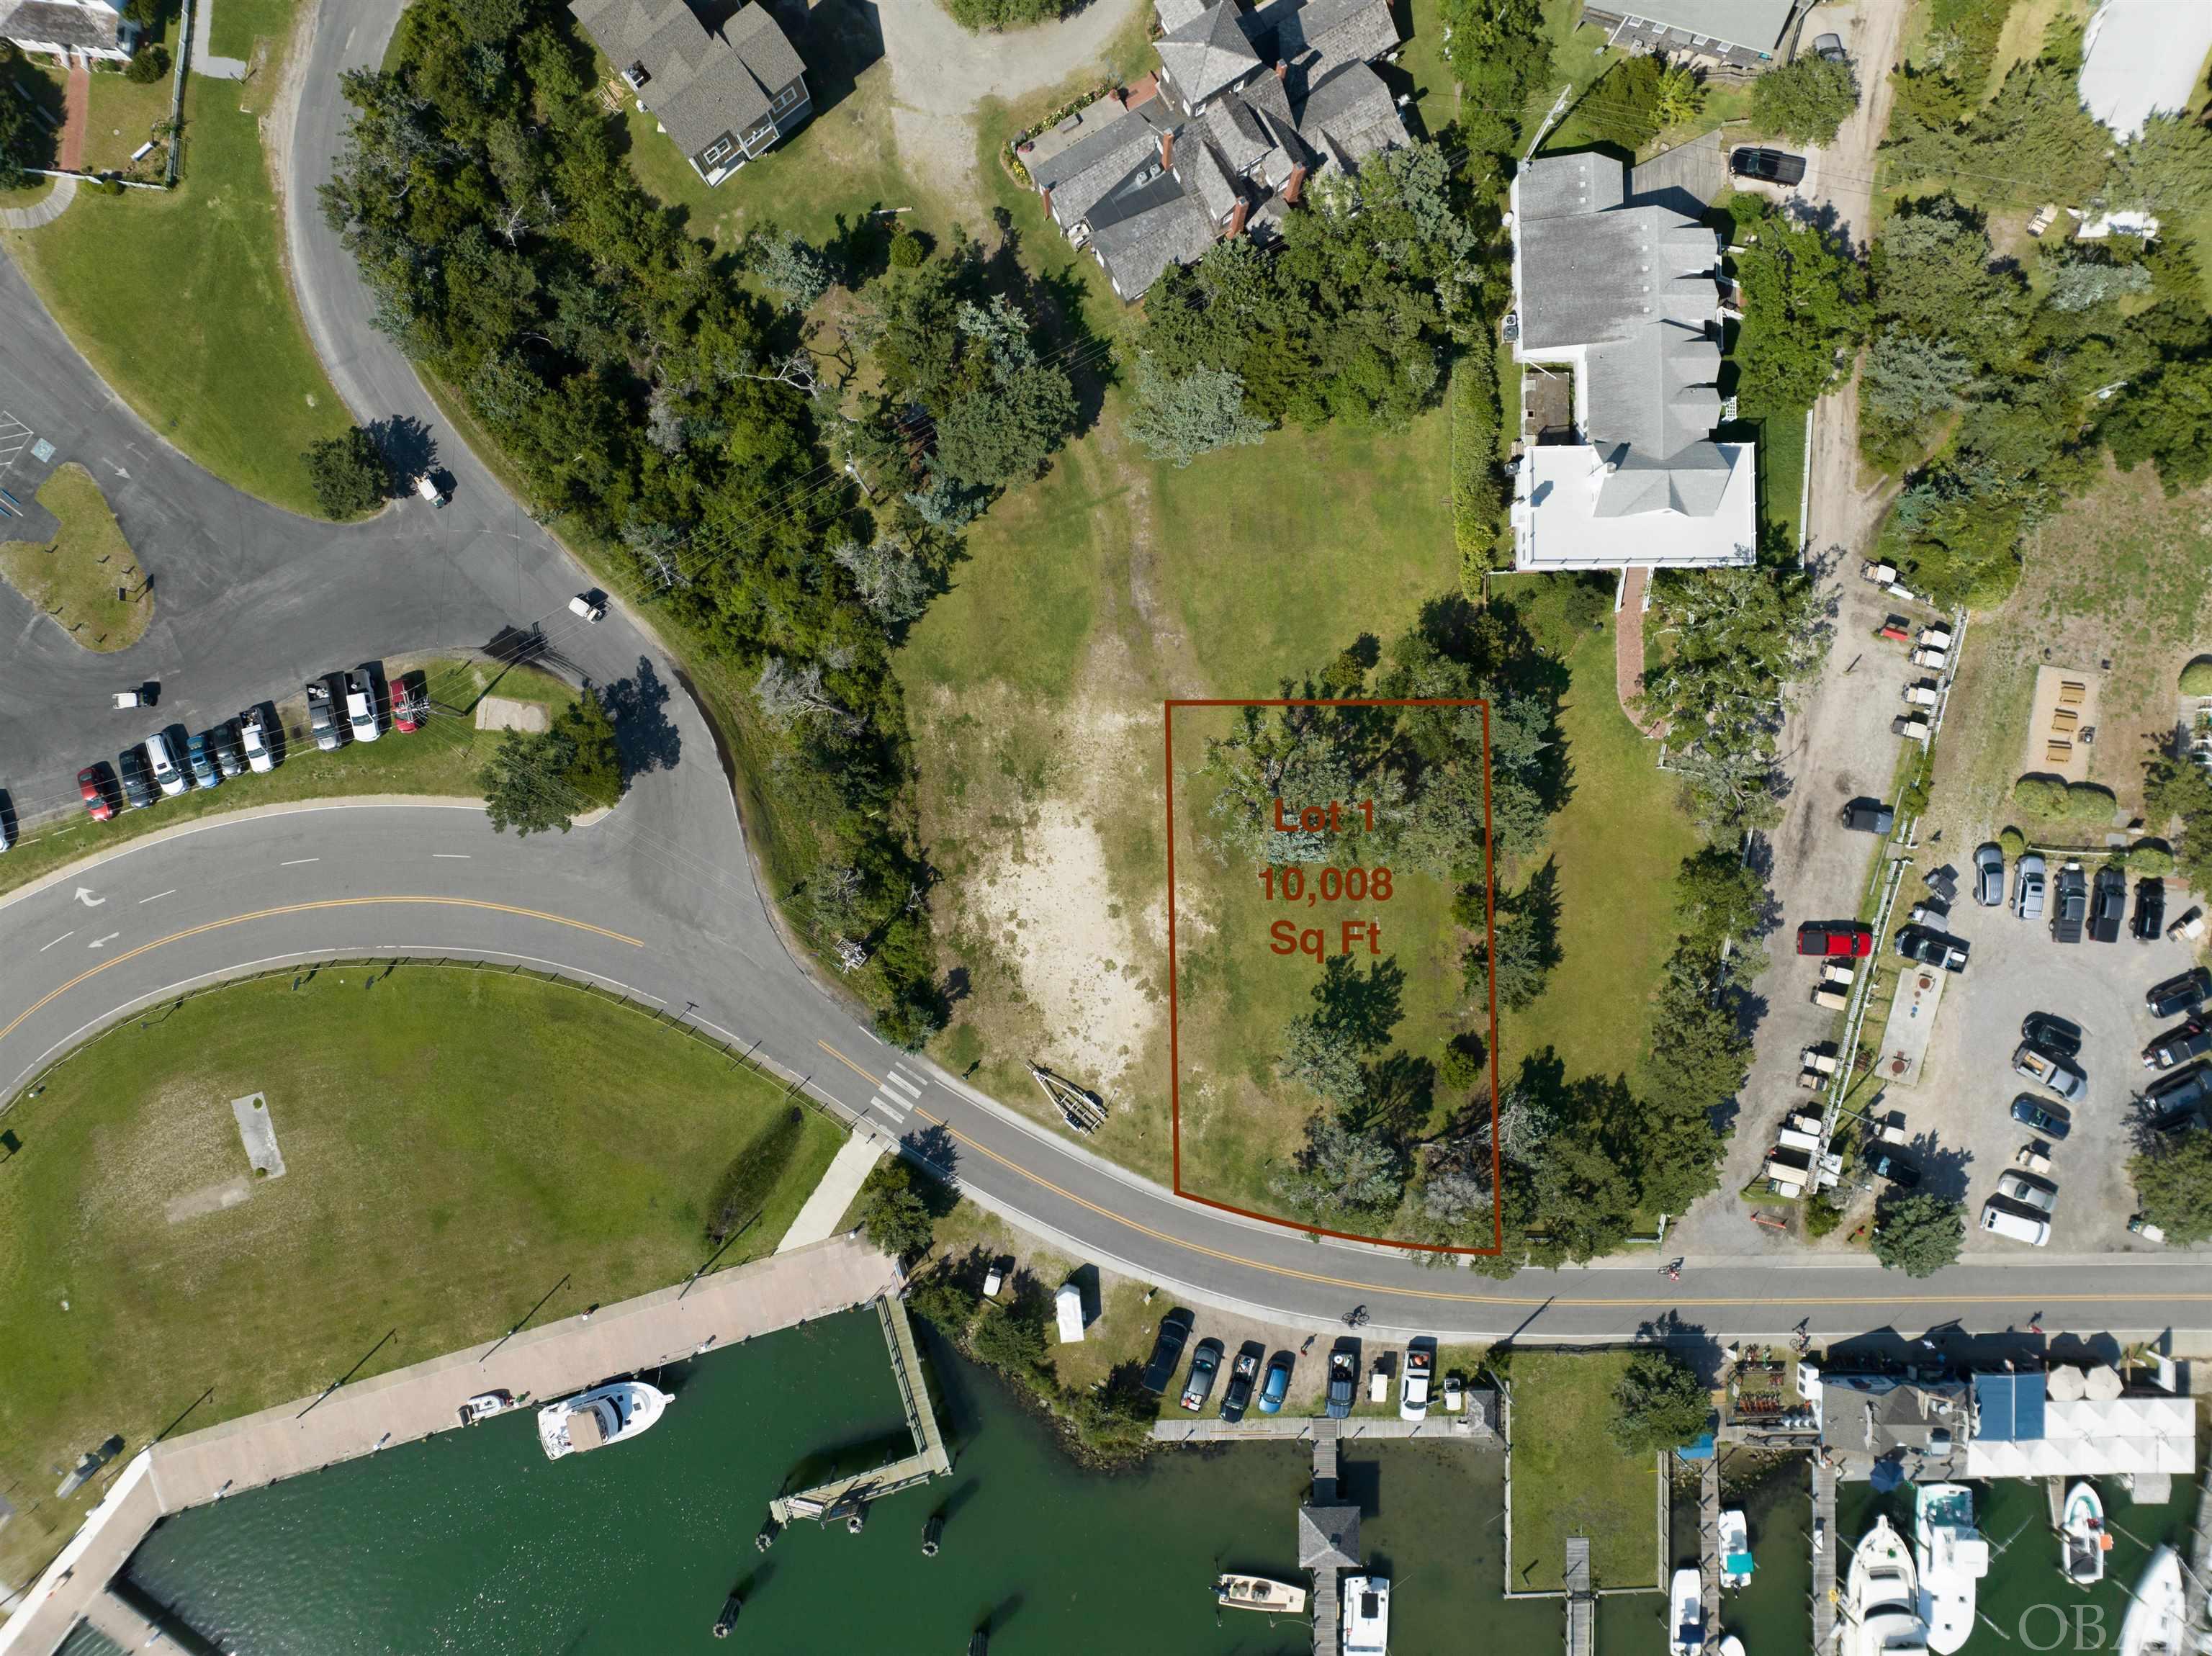 One of a kind opportunity to own a parcel of land with boundless potential in Ocracoke. Unimpeded views of Silver Lake Harbor make this lot the perfect location for any commercial or residential/condominium dreams. A community septic conveys as part of the subdivision and is located off site, rendering this entire lot buildable without the need for drain field installation. This is a distinctive location with unimpeded sunset views across the harbor, a rarity. Beautiful mature live oaks and cedars promote the coastal ambiance. This is the second private parcel from the NCDOT ferry terminal as visitors from the passenger and car ferries venture into the village. Heavy foot and vehicular traffic pass this location daily. Engineered building plans for a 60 seat/24 barstool restaurant with rooftop deck on file and could convey with parcel. This parcel has sister listings of the adjacent lot, marina boat slips, and Berkley that could compliment your vision. Lot could be expanded to 12,500 sq ft - inquire with an agent as to the possibilities this lot provides.